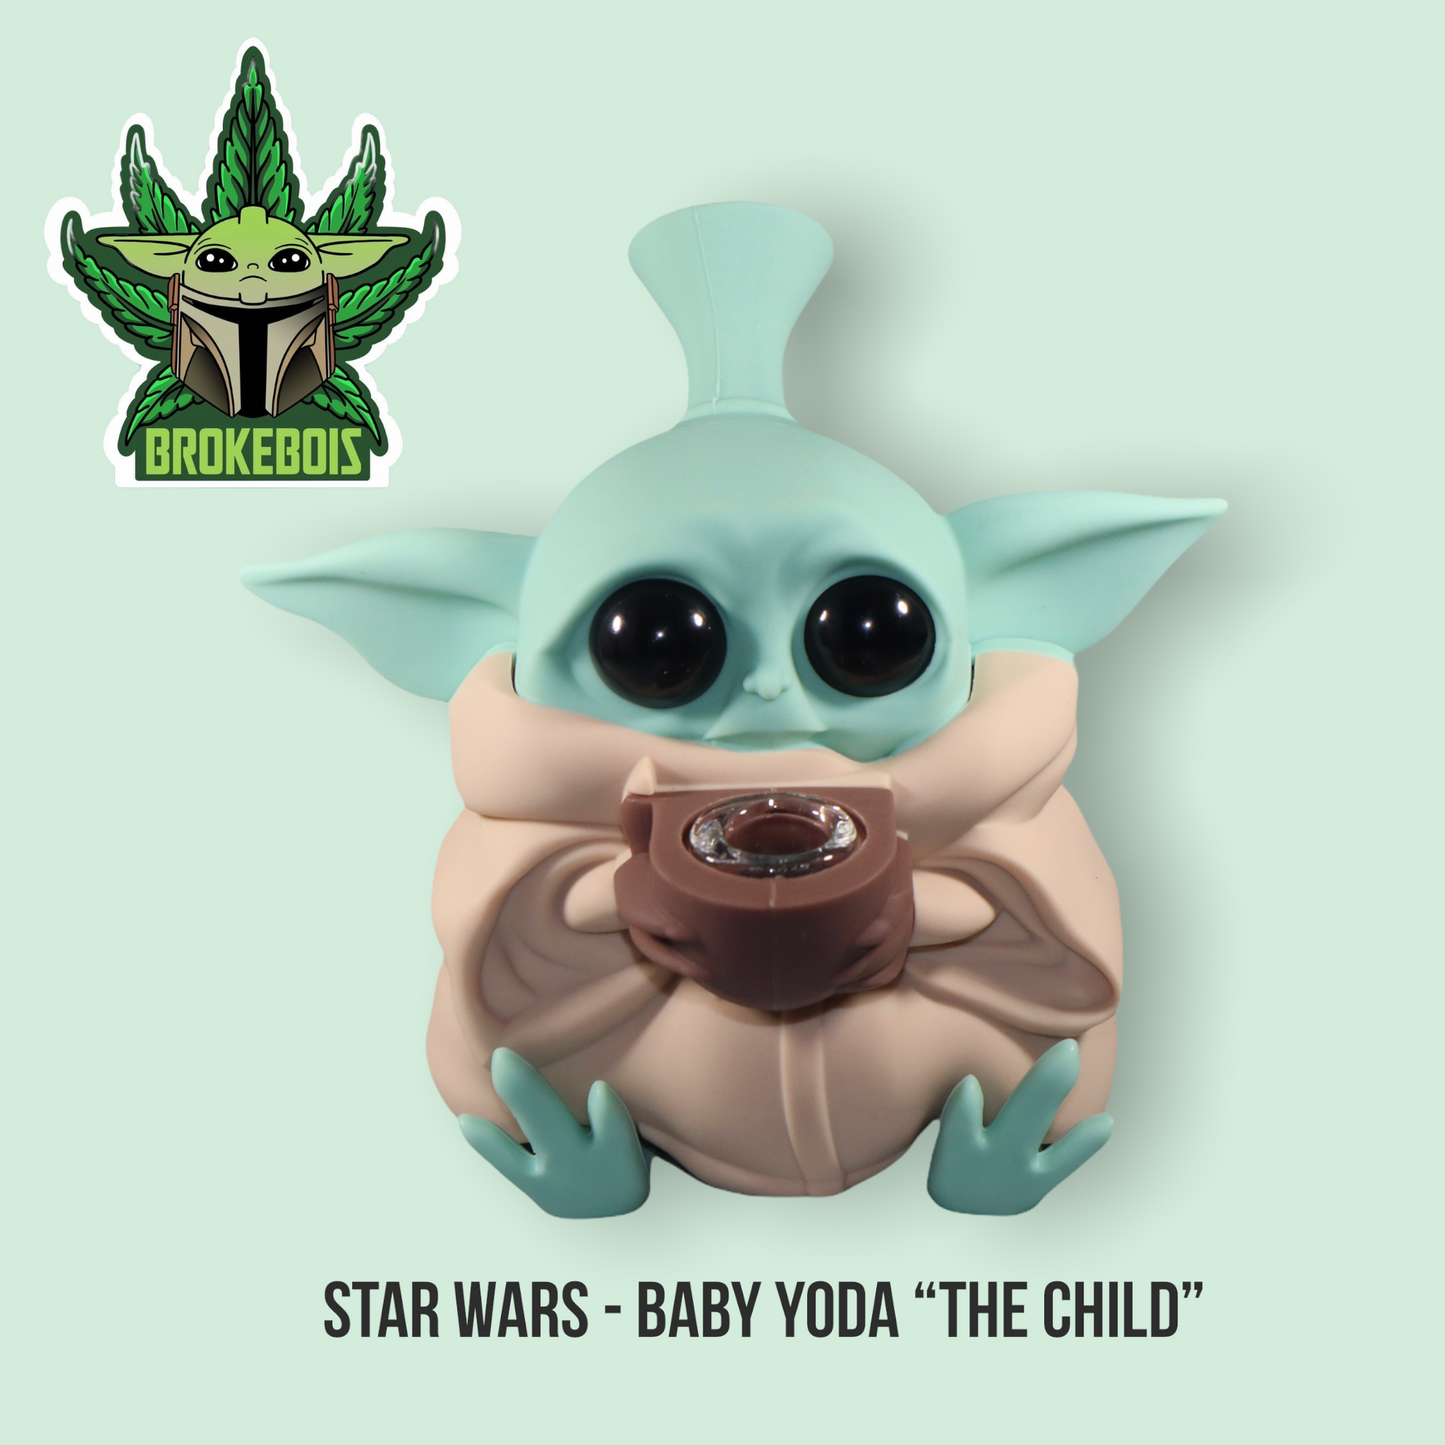 Star Wars Baby Yoda Silicone Water Pipe - Grogu " The Child"